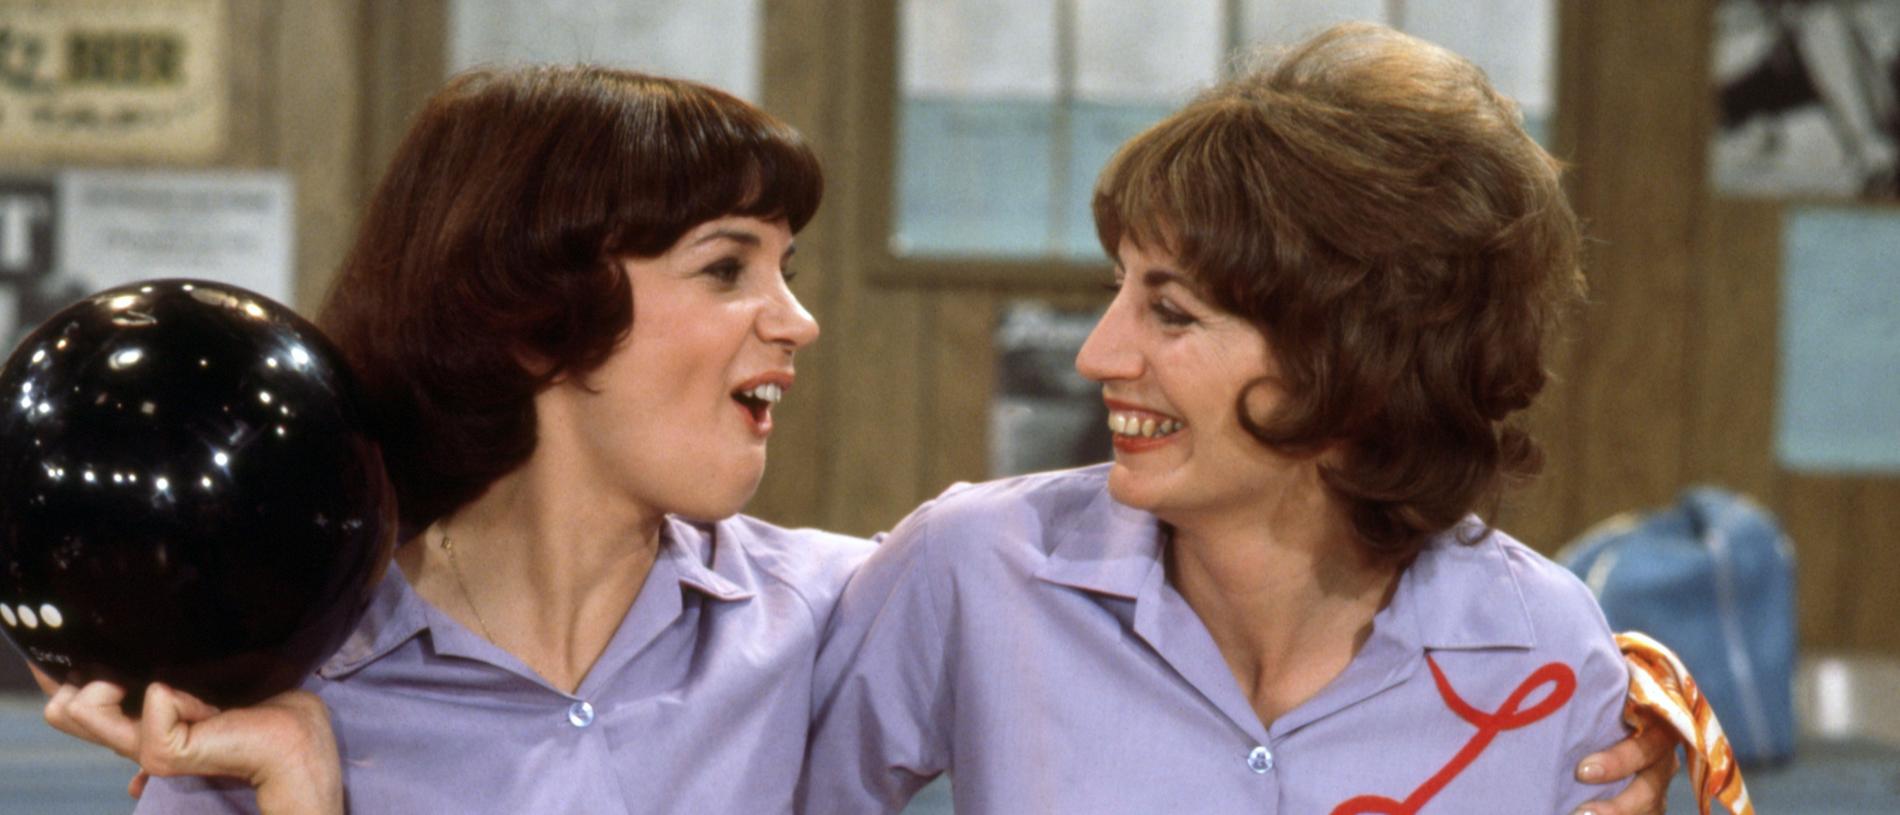 Legendary 'Laverne & Shirley' Actress Cindy Williams Passes Away at 75